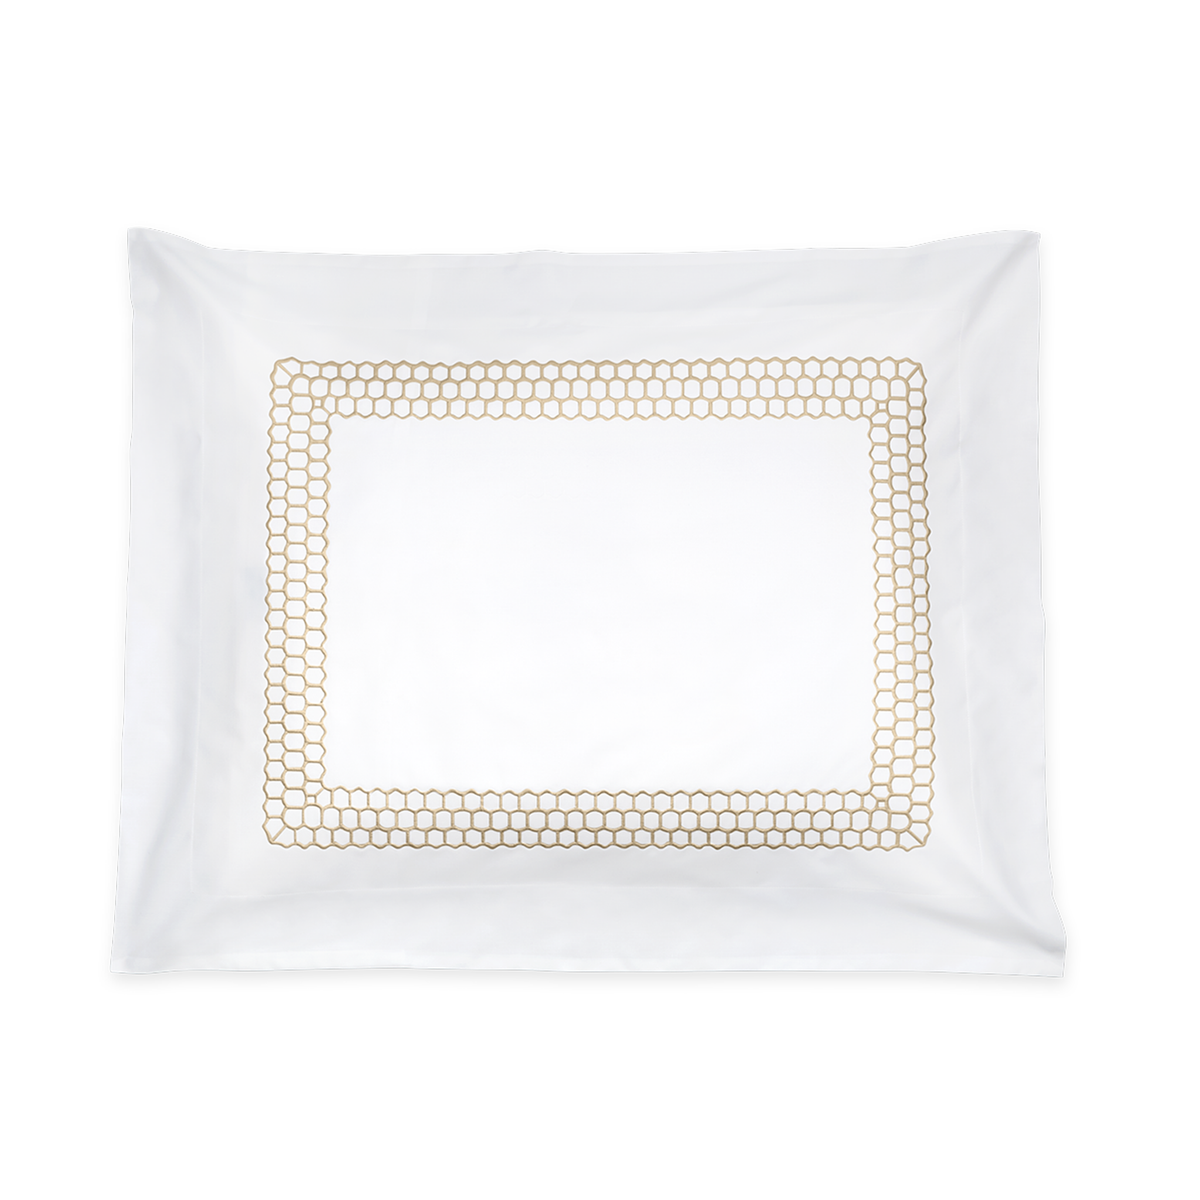 Clear Image of Matouk Liana Bedding Standard Sham in Champagne Color